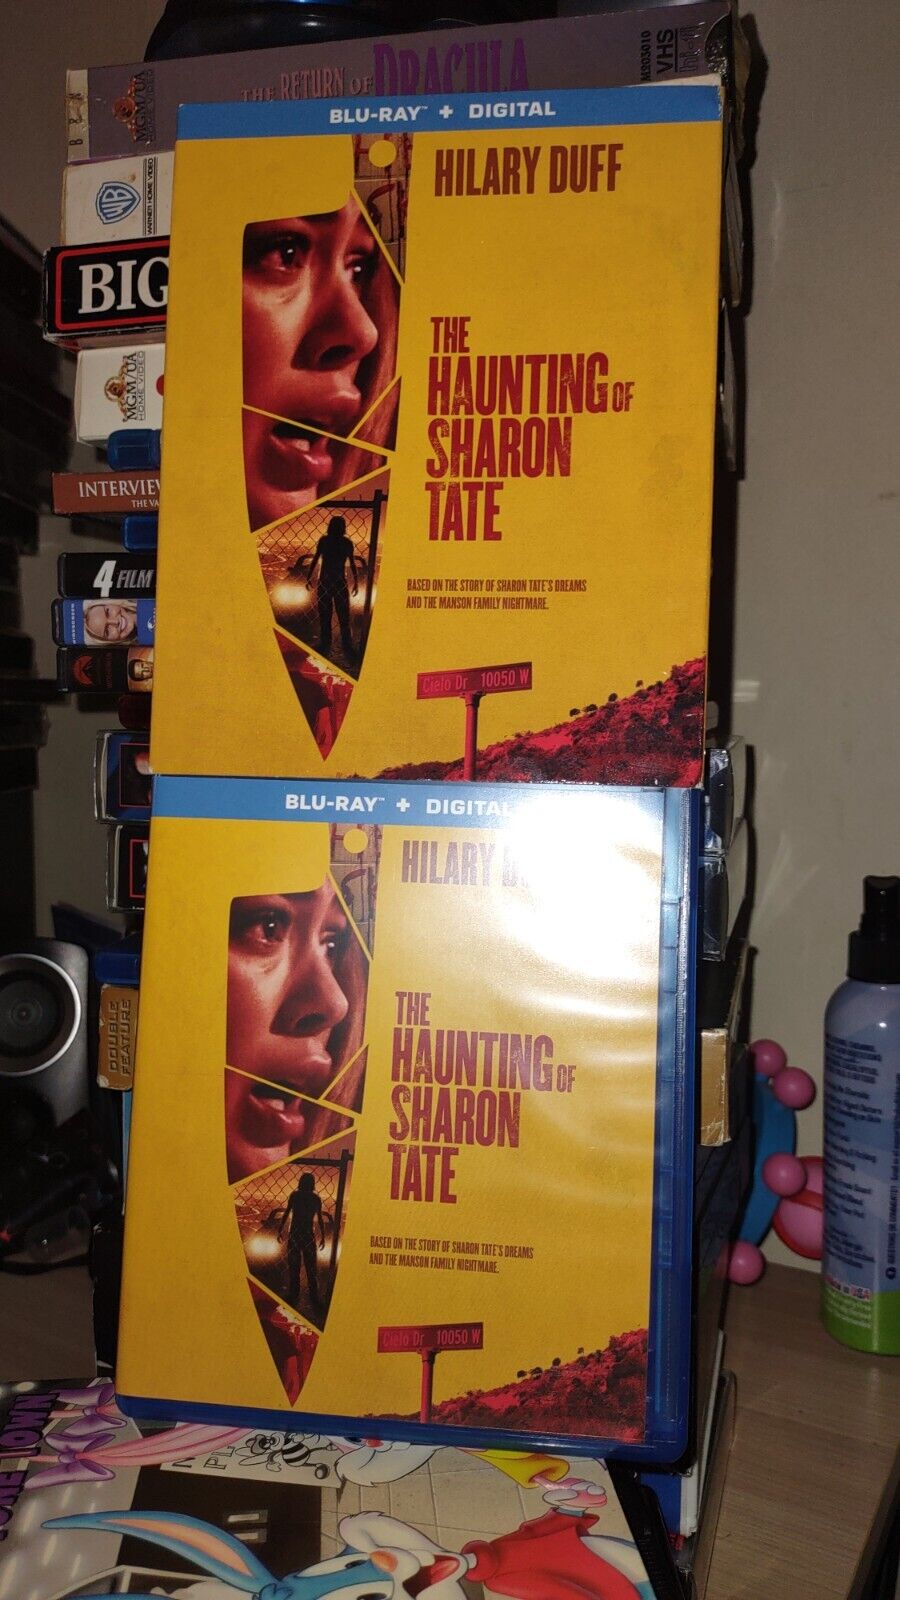 The Haunting Of Sharon Tate (Blu-ray) with SLIPCOVER Hilary Duff Horror Thriller